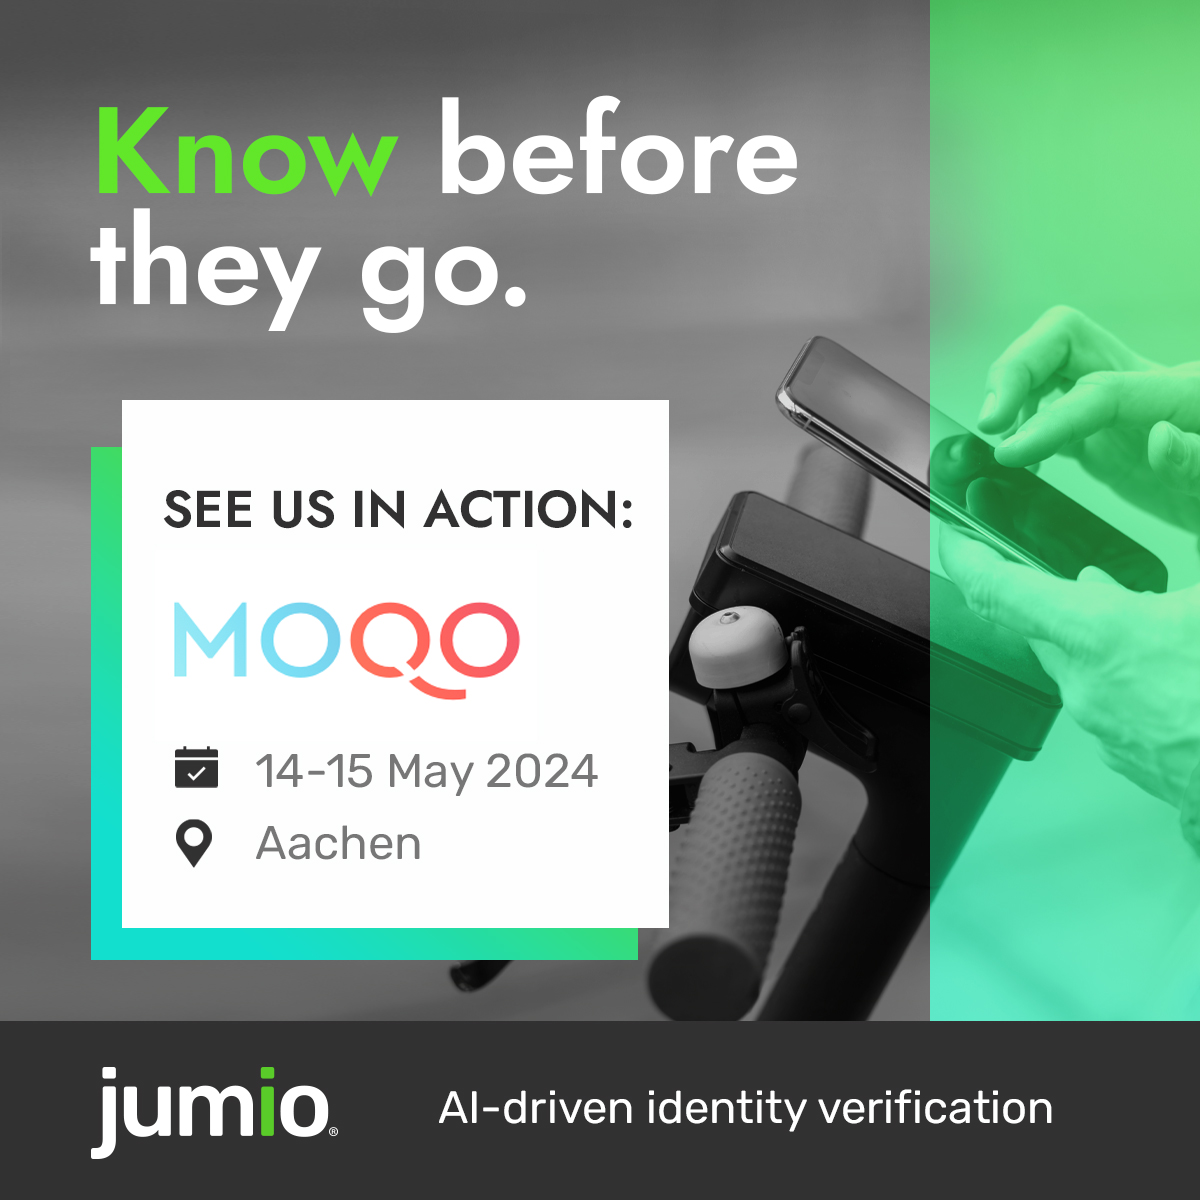 In Aachen this week for #MOQOSummit2024? Come see us to learn how Jumio can help establish the real-world identity of your users: moqo.de/summit